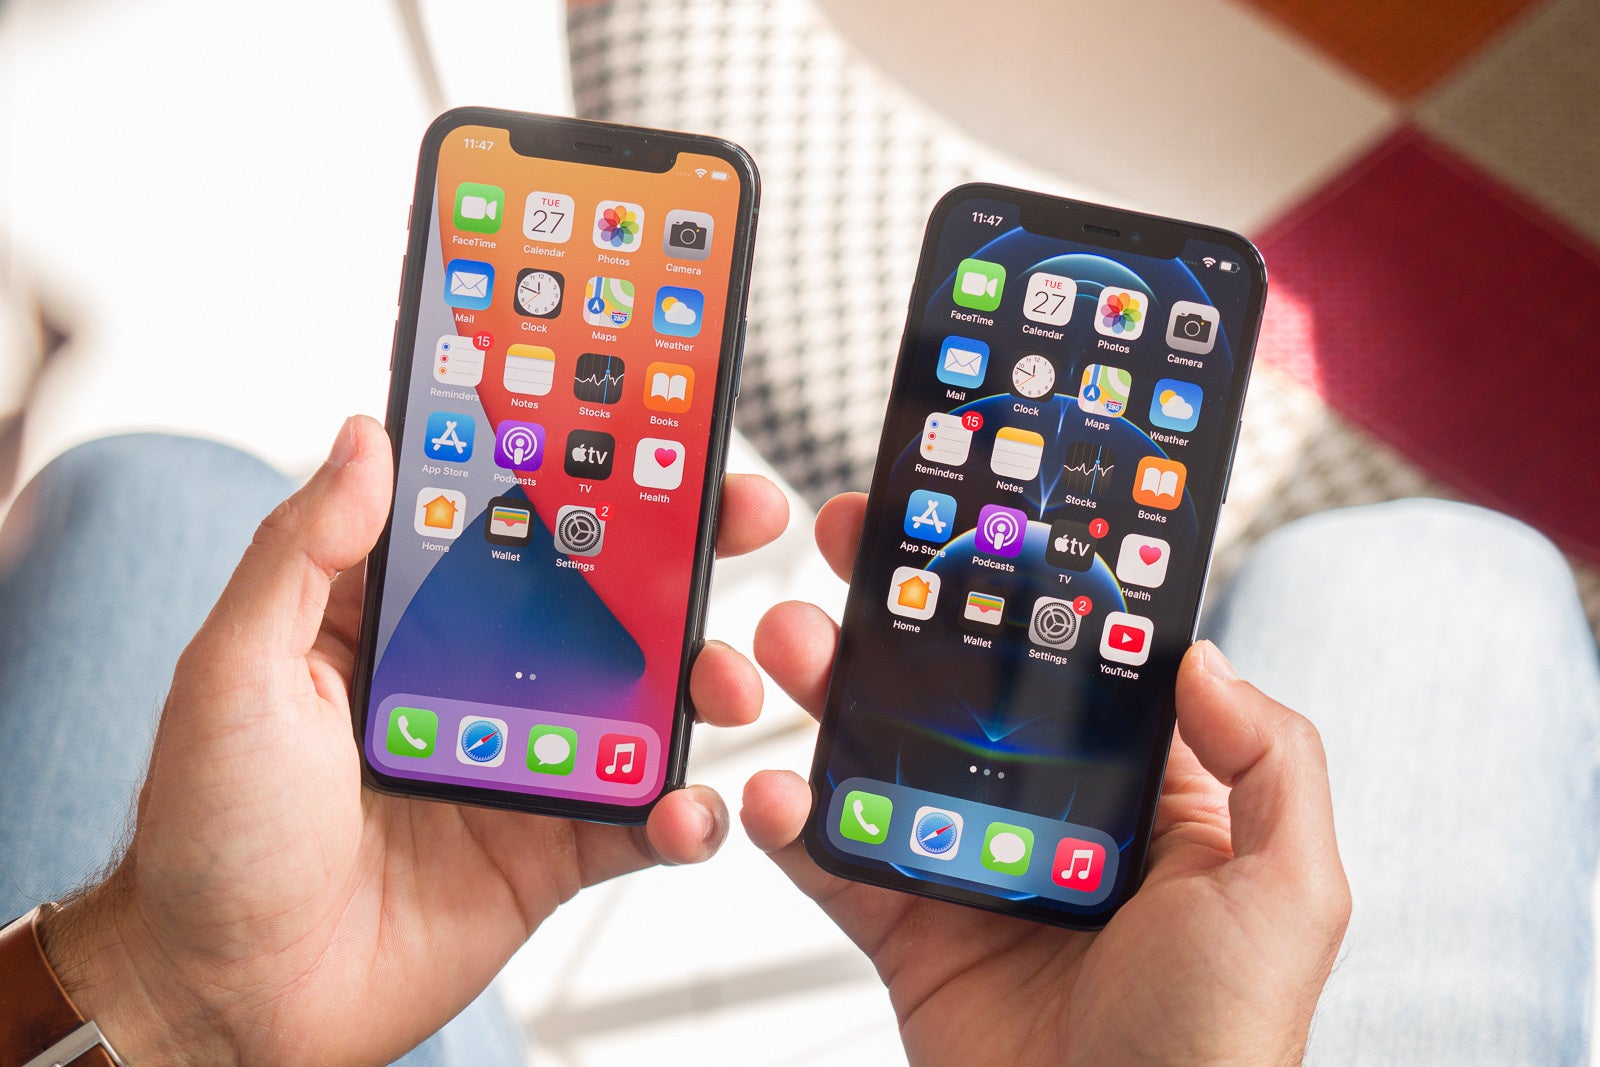 Left - iPhone 11 Pro | Right - iPhone 12 Pro - Should you buy iPhone 11 Pro in 2021?